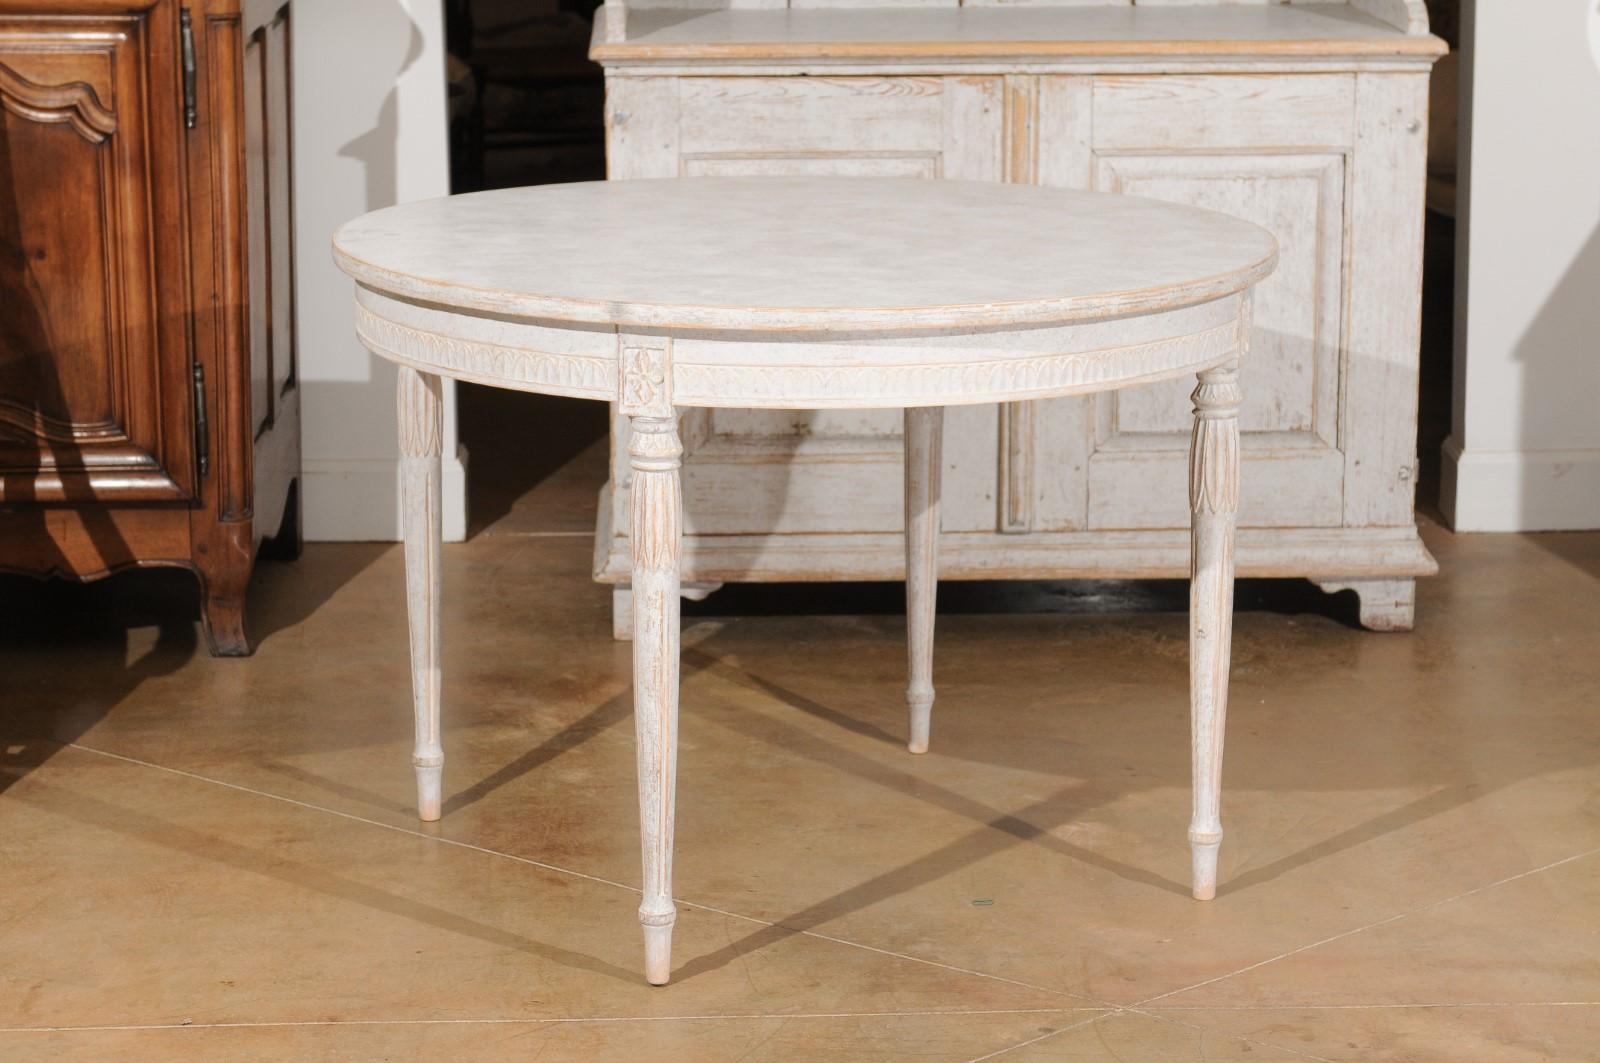 A Swedish Gustavian Style painted table from the 20th century, with circular top and fluted legs. Created in Sweden during the 20th century, this Gustavian Style table features a round top sitting above an elegant apron adorned with a frieze of